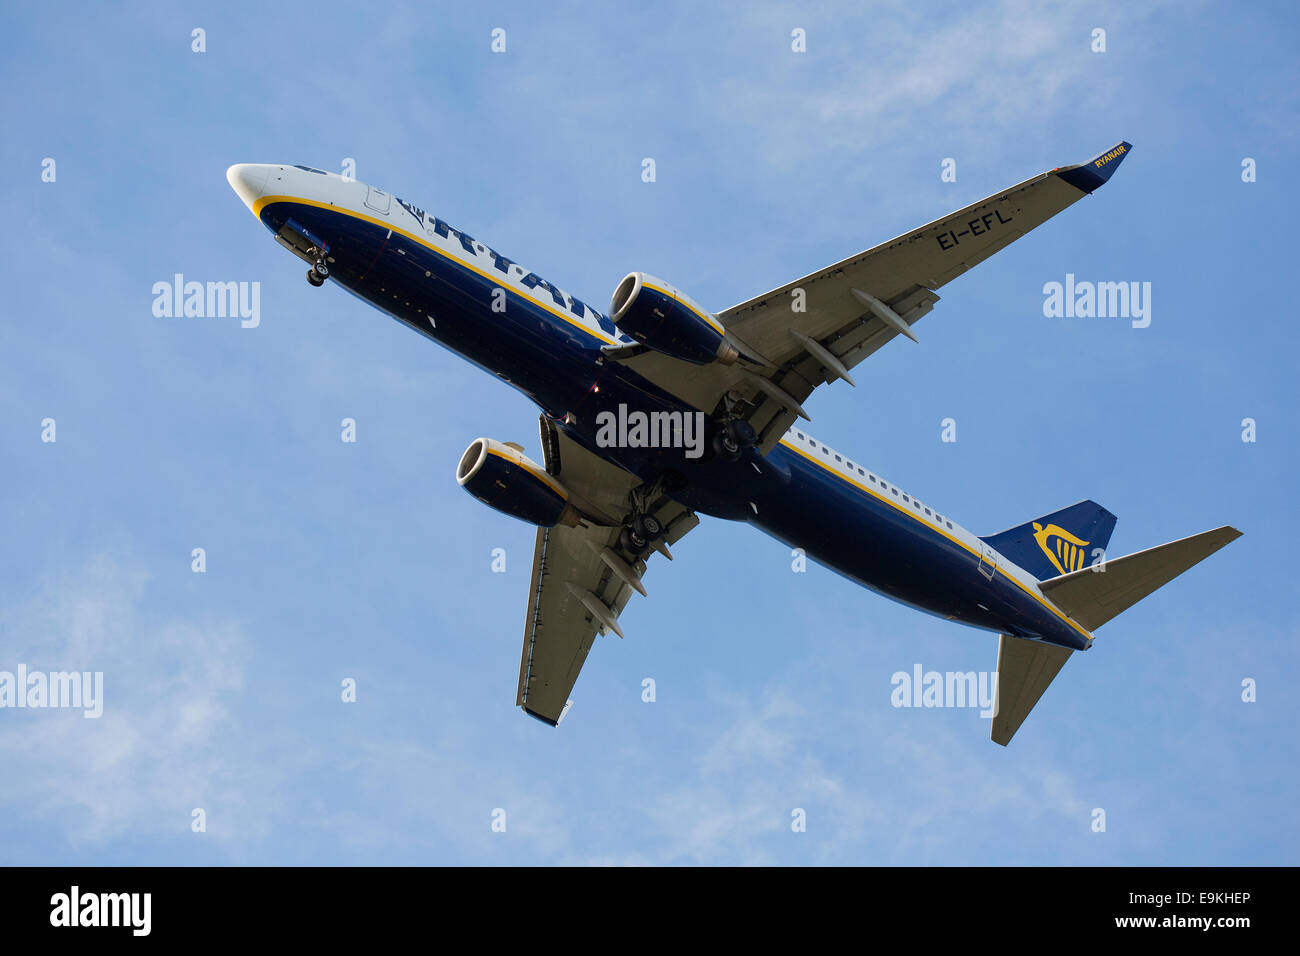 Boeing 737-8AS (WL) EI-EFL Ryanair on approach to land at Manchester Airport Stock Photo